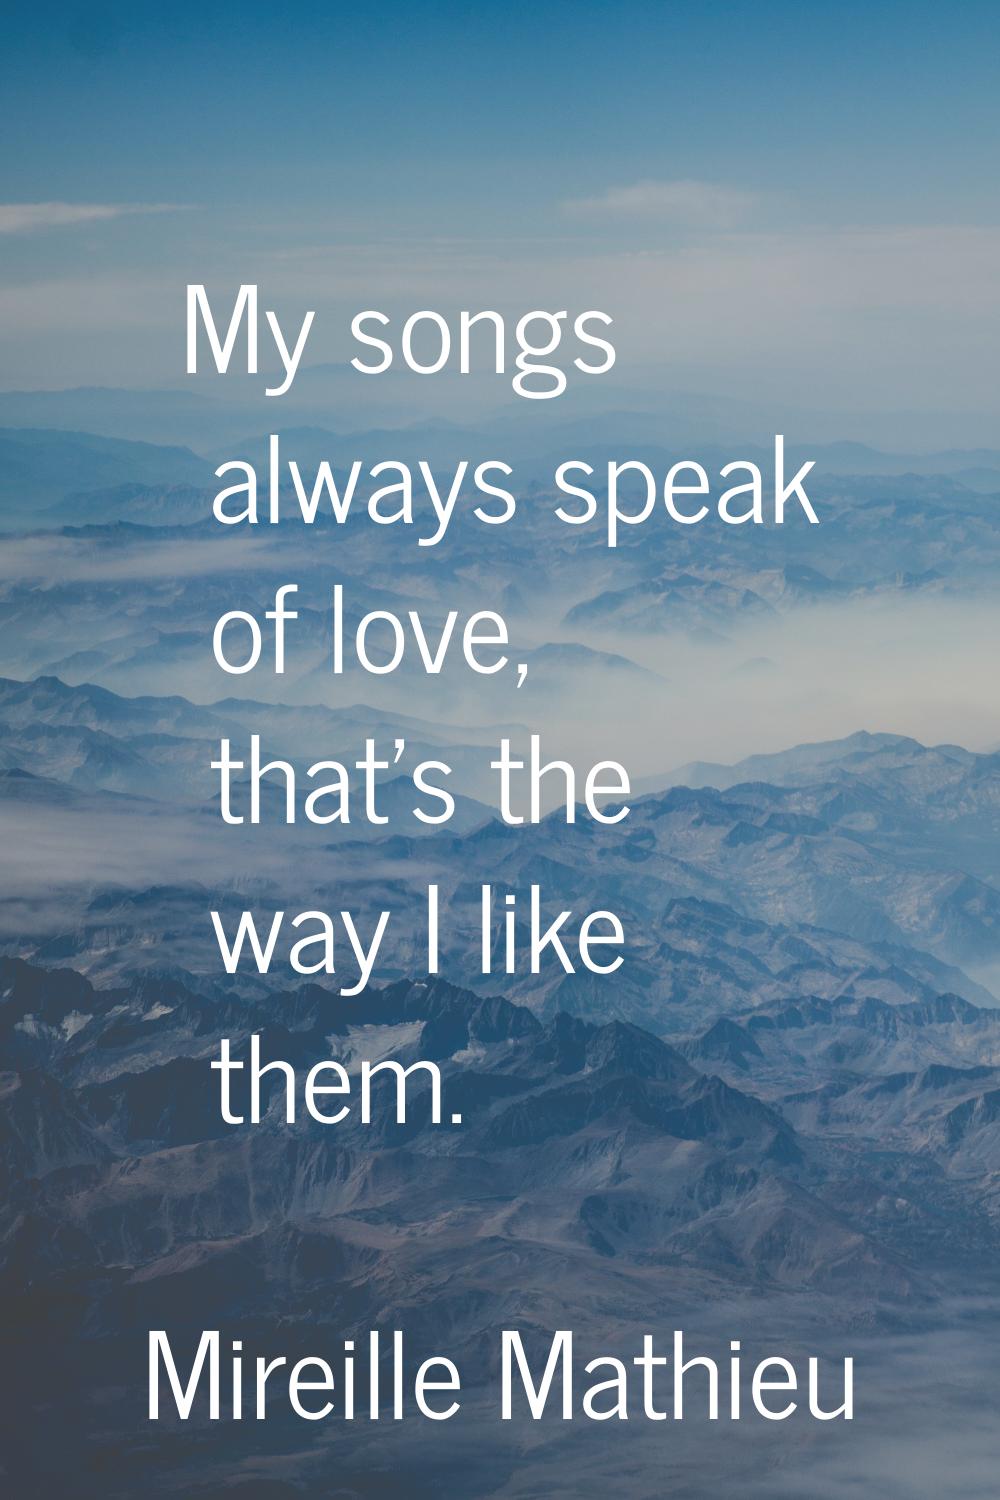 My songs always speak of love, that's the way I like them.